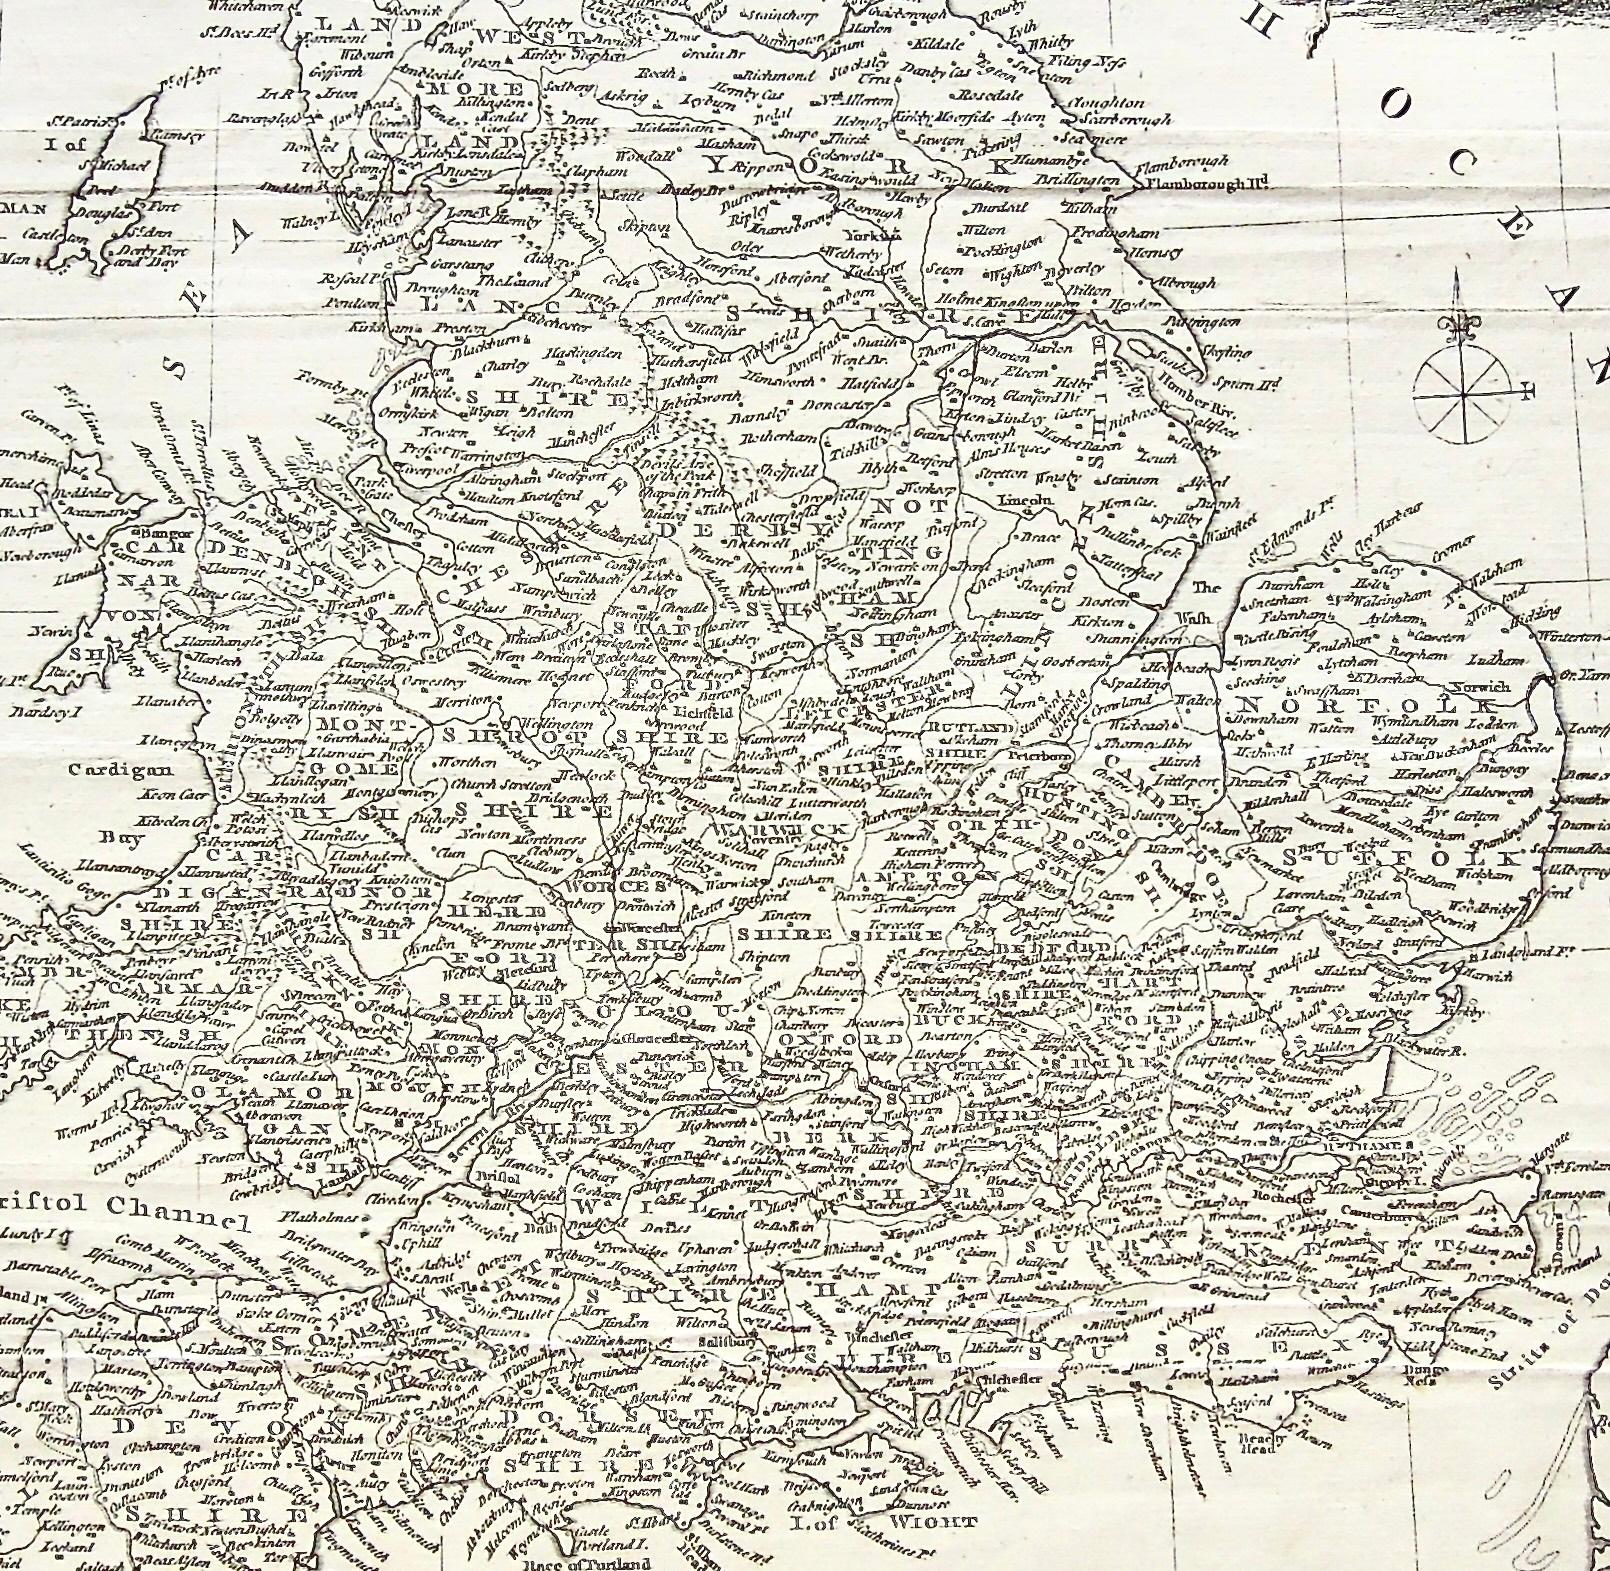 A New and Accurate Map of that District of Great Britain called England & Wales &c. from the latest & most Correct Surveys. By T Kitchen, Geographer & Hydrographer to His Majesty.
Upper Center: Engraved for Walpoole's New & Complete British